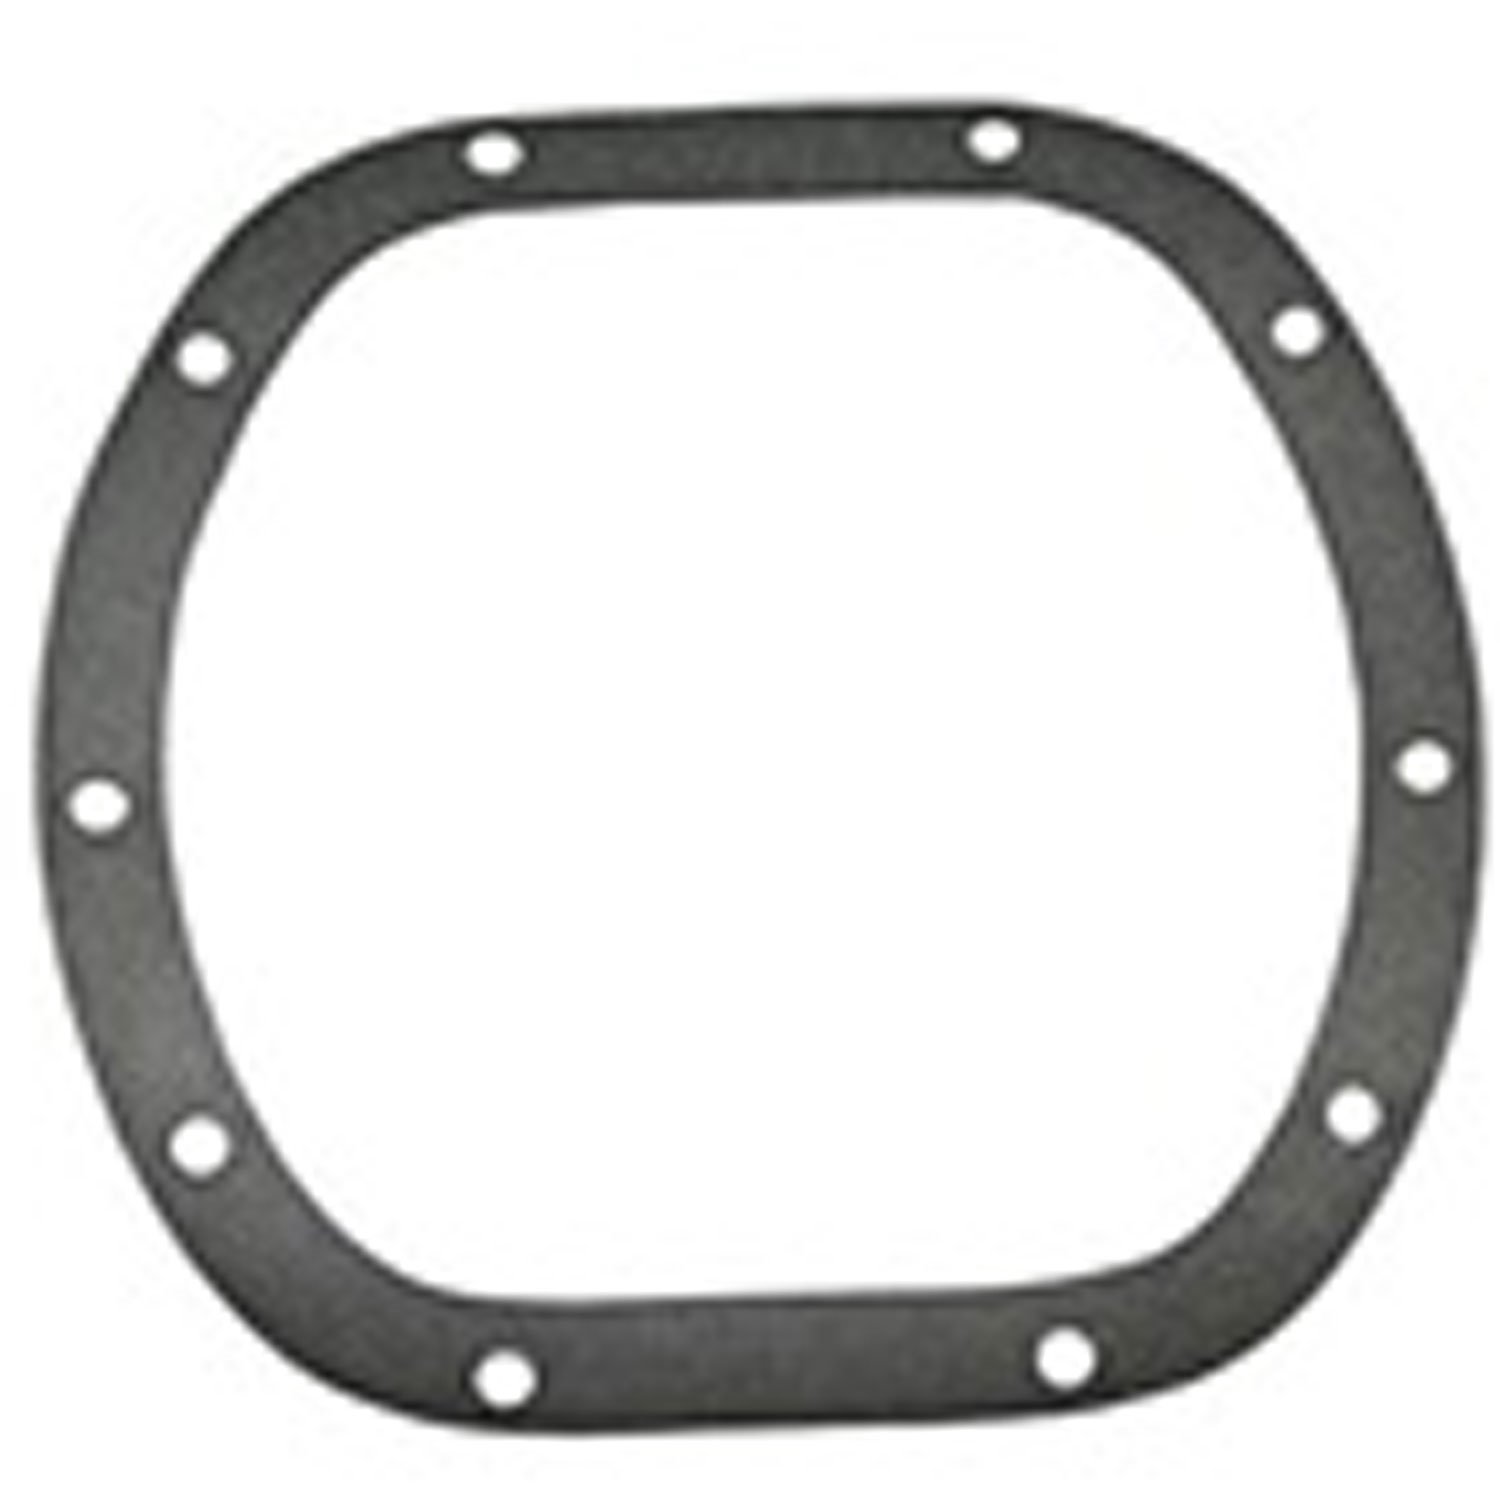 Differential Cover Gasket for Dana 25, 27 and